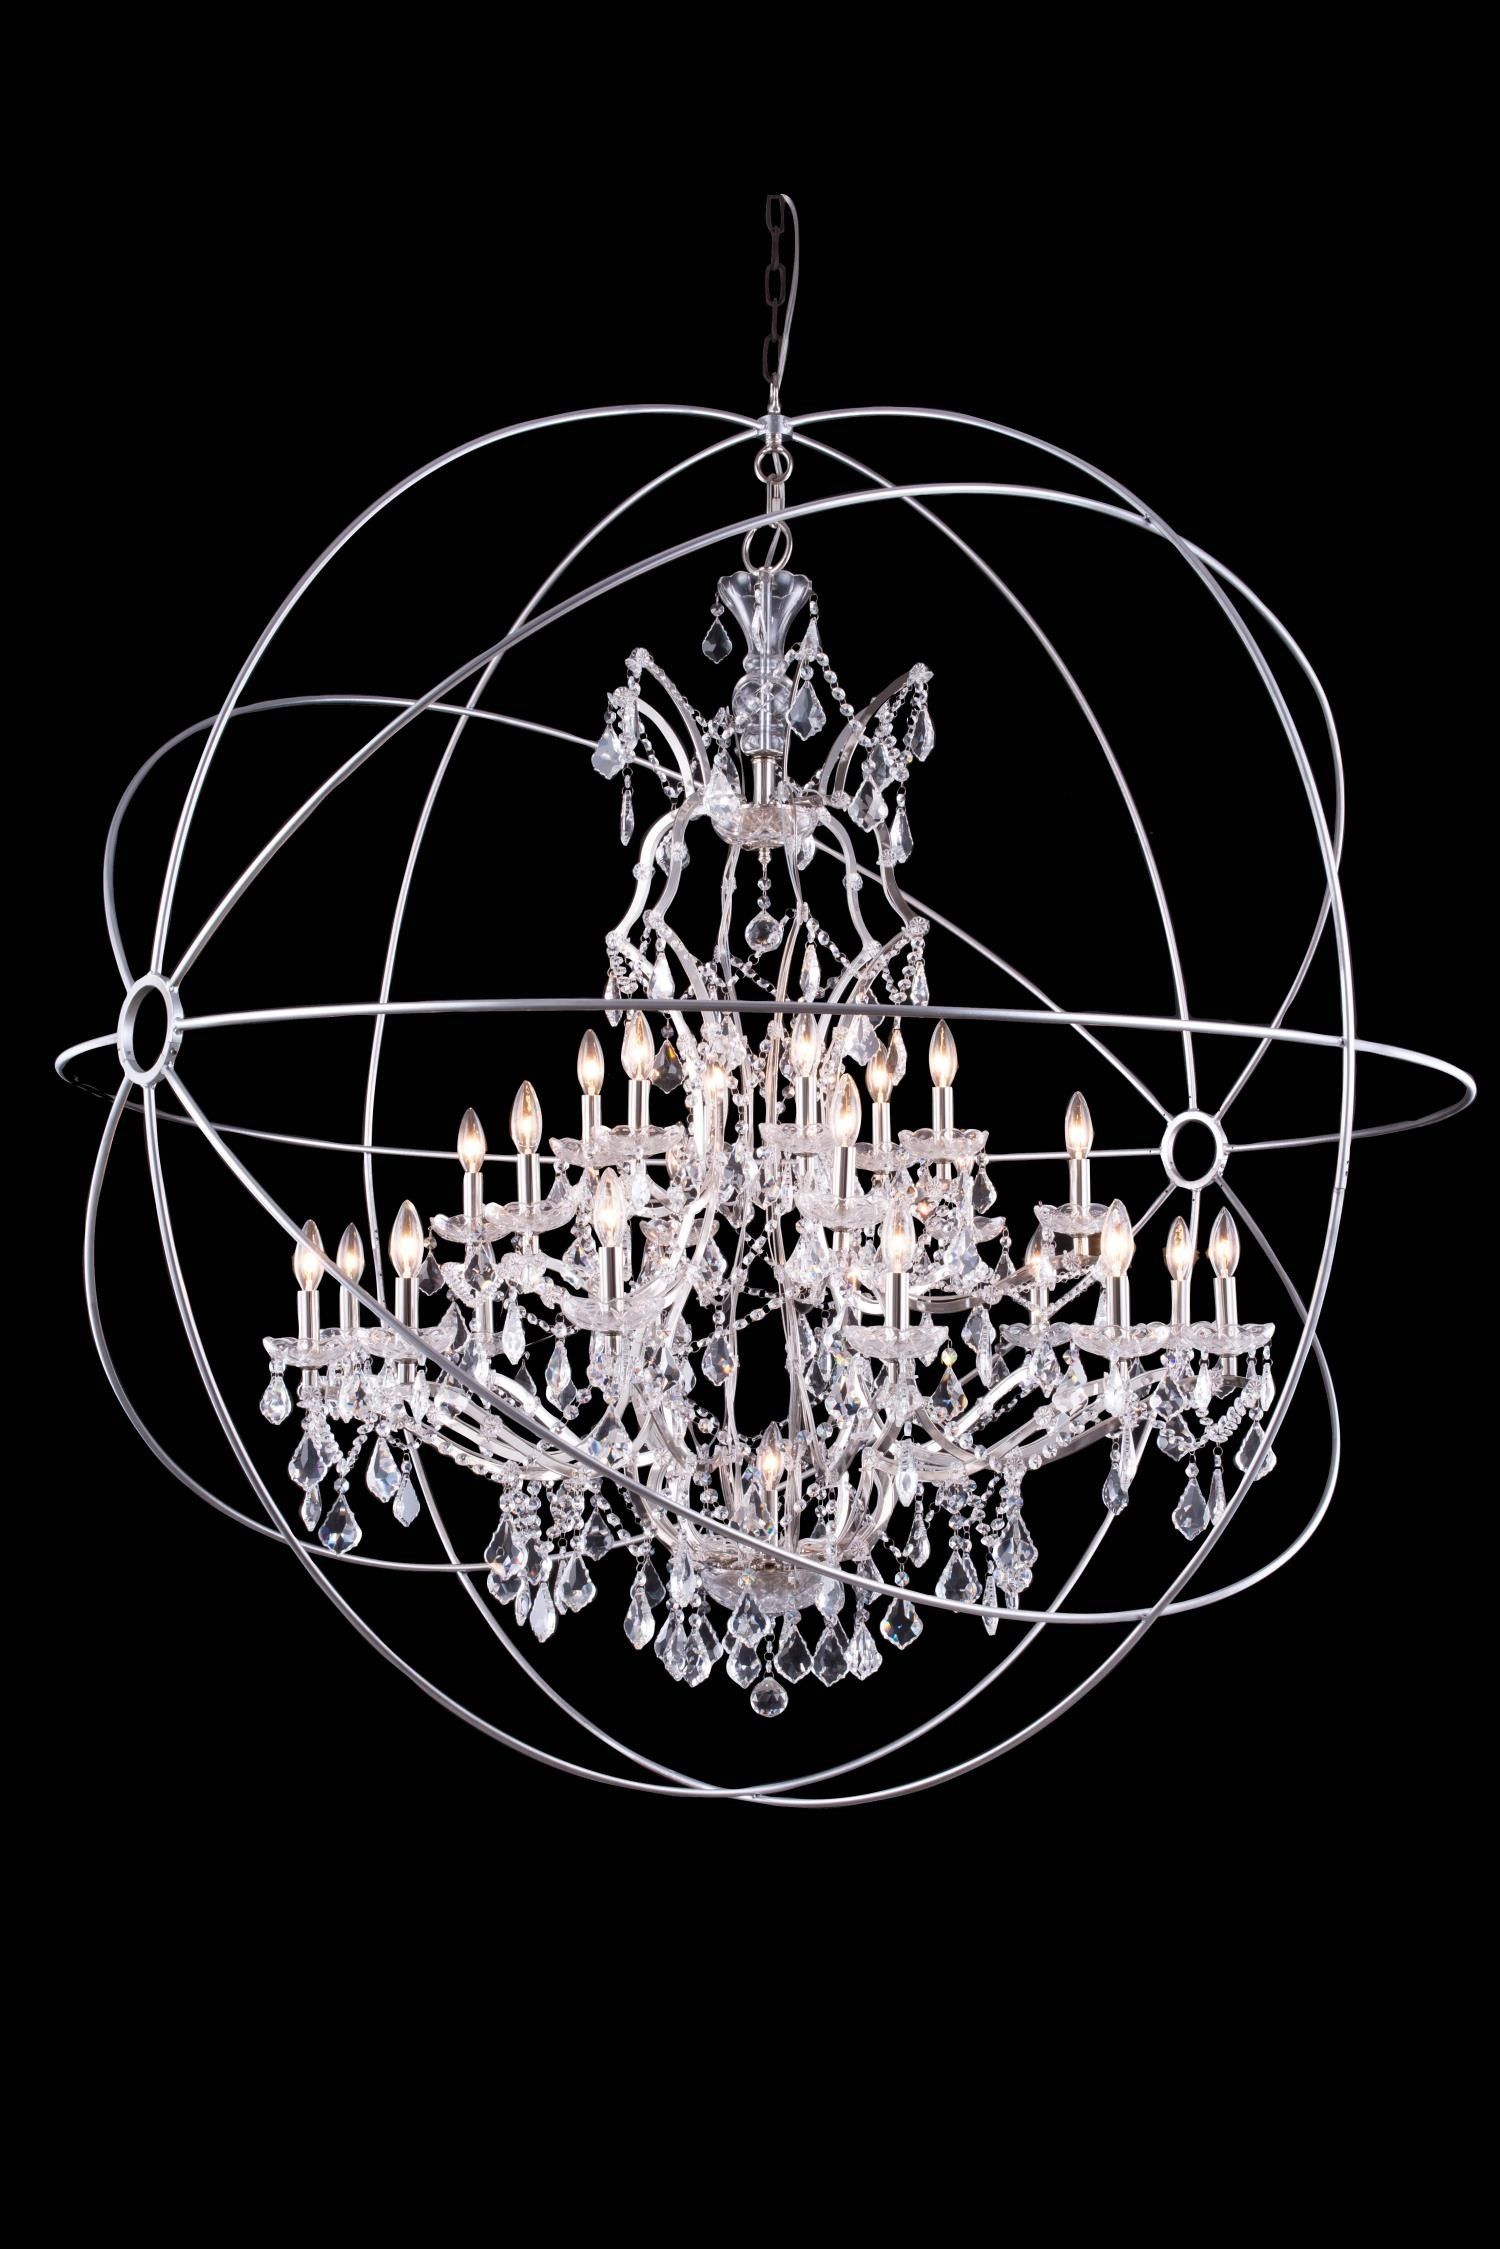 Chandelier Inspiring Extra Large Orb Chandelier Foucaults Iron Regarding Extra Large Chandeliers (View 12 of 12)